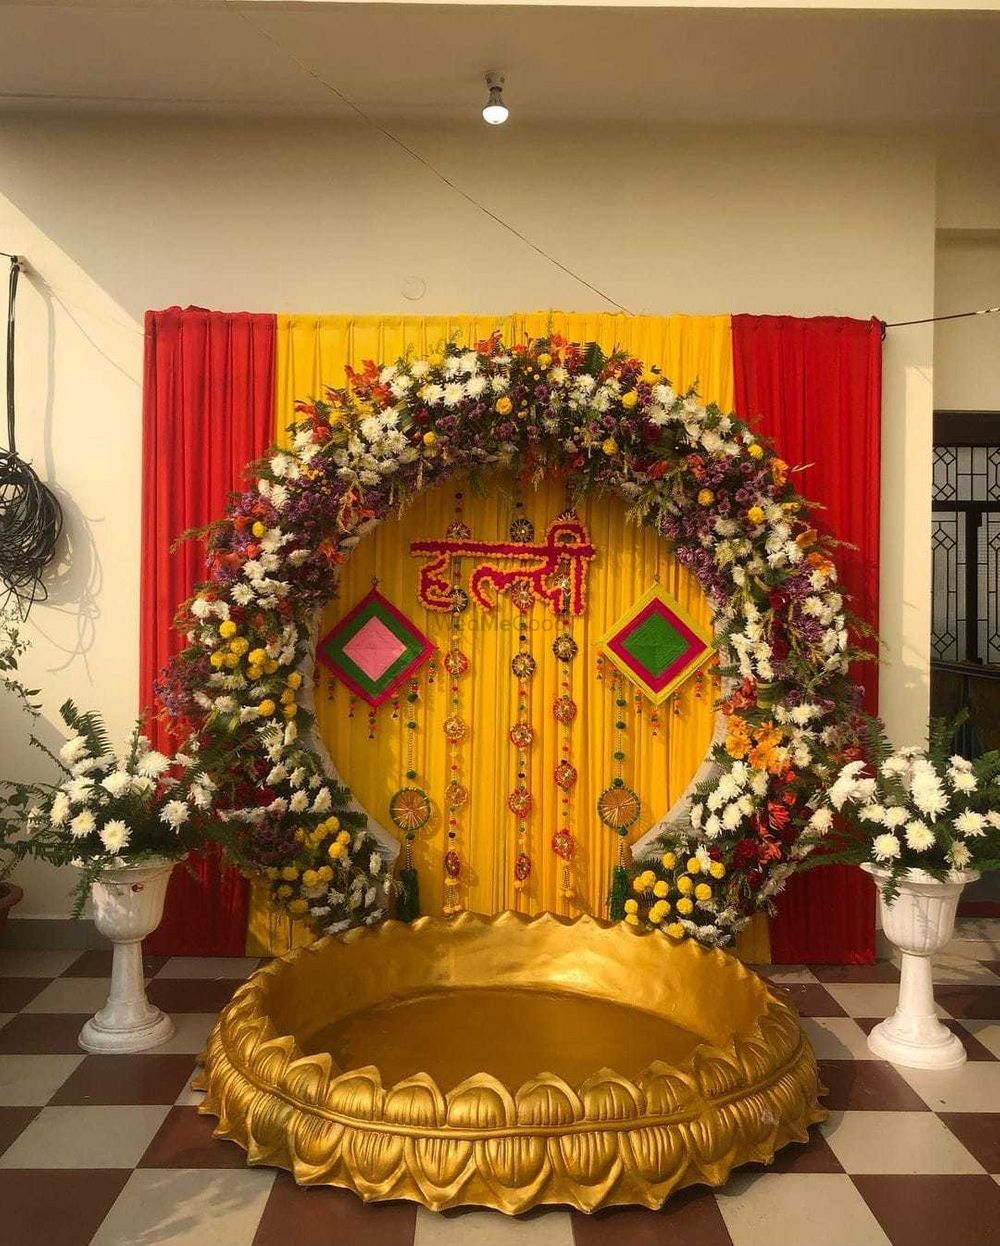 Photo From Haldi Decoration - By Bruveg Events